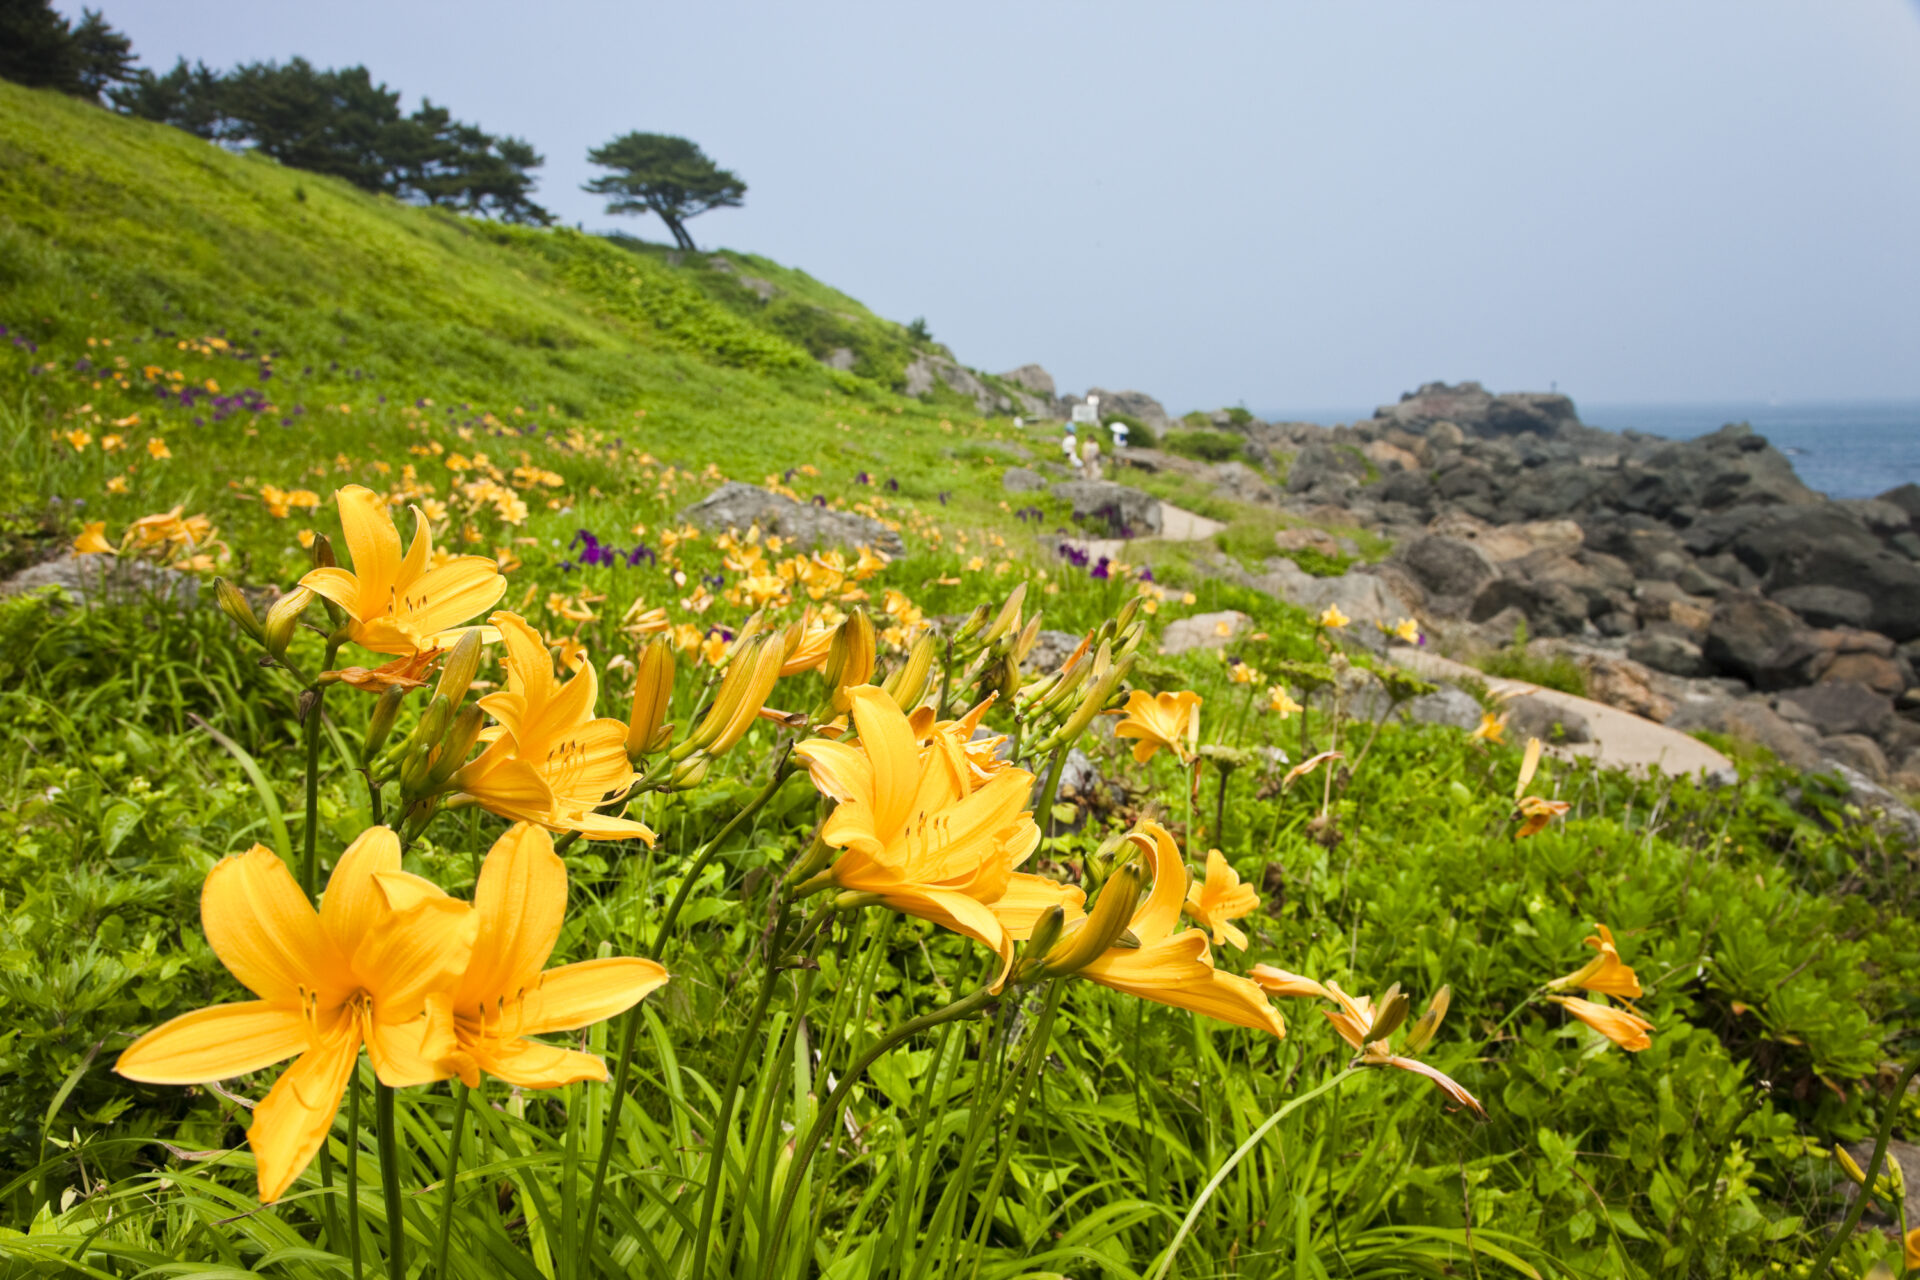 Tanabu Coast Natural Lawn Area Enjoy a Beautiful Flower Garden with over 650 Species of Plants in Full Bloom!